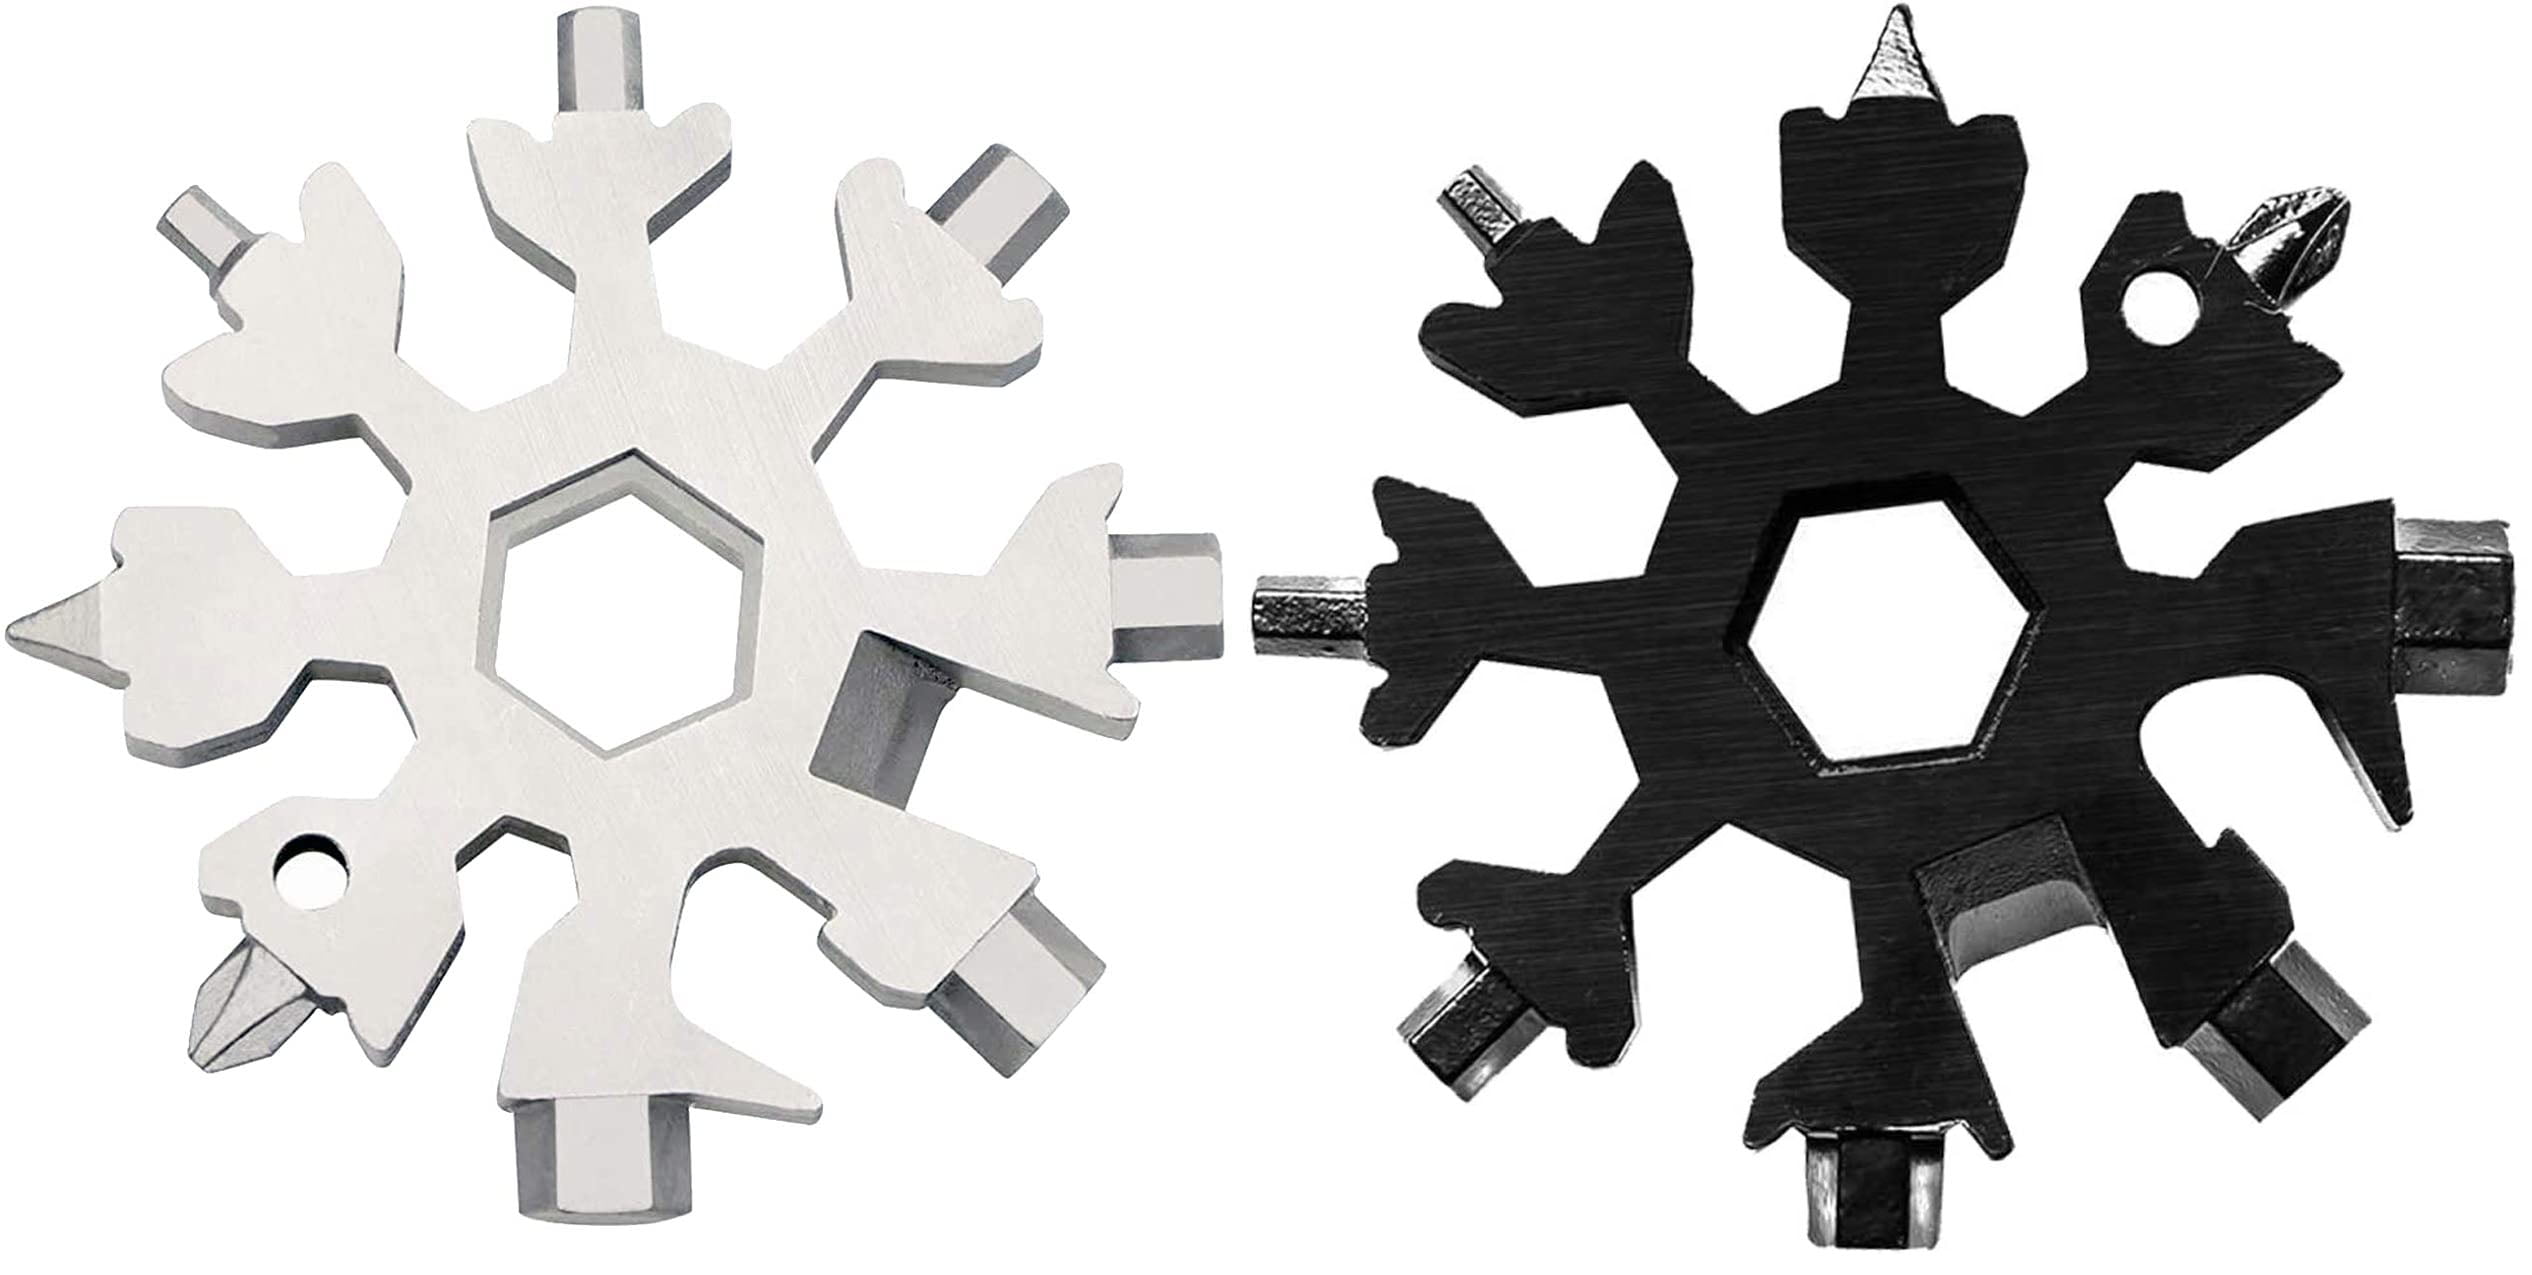 Gifts for Men - 18-in-1 Snowflakes Multi-Tool, Gadgets for Men, Christmas  Gifts, Cool Tool Small Gift for Men, Papa (2Pack)